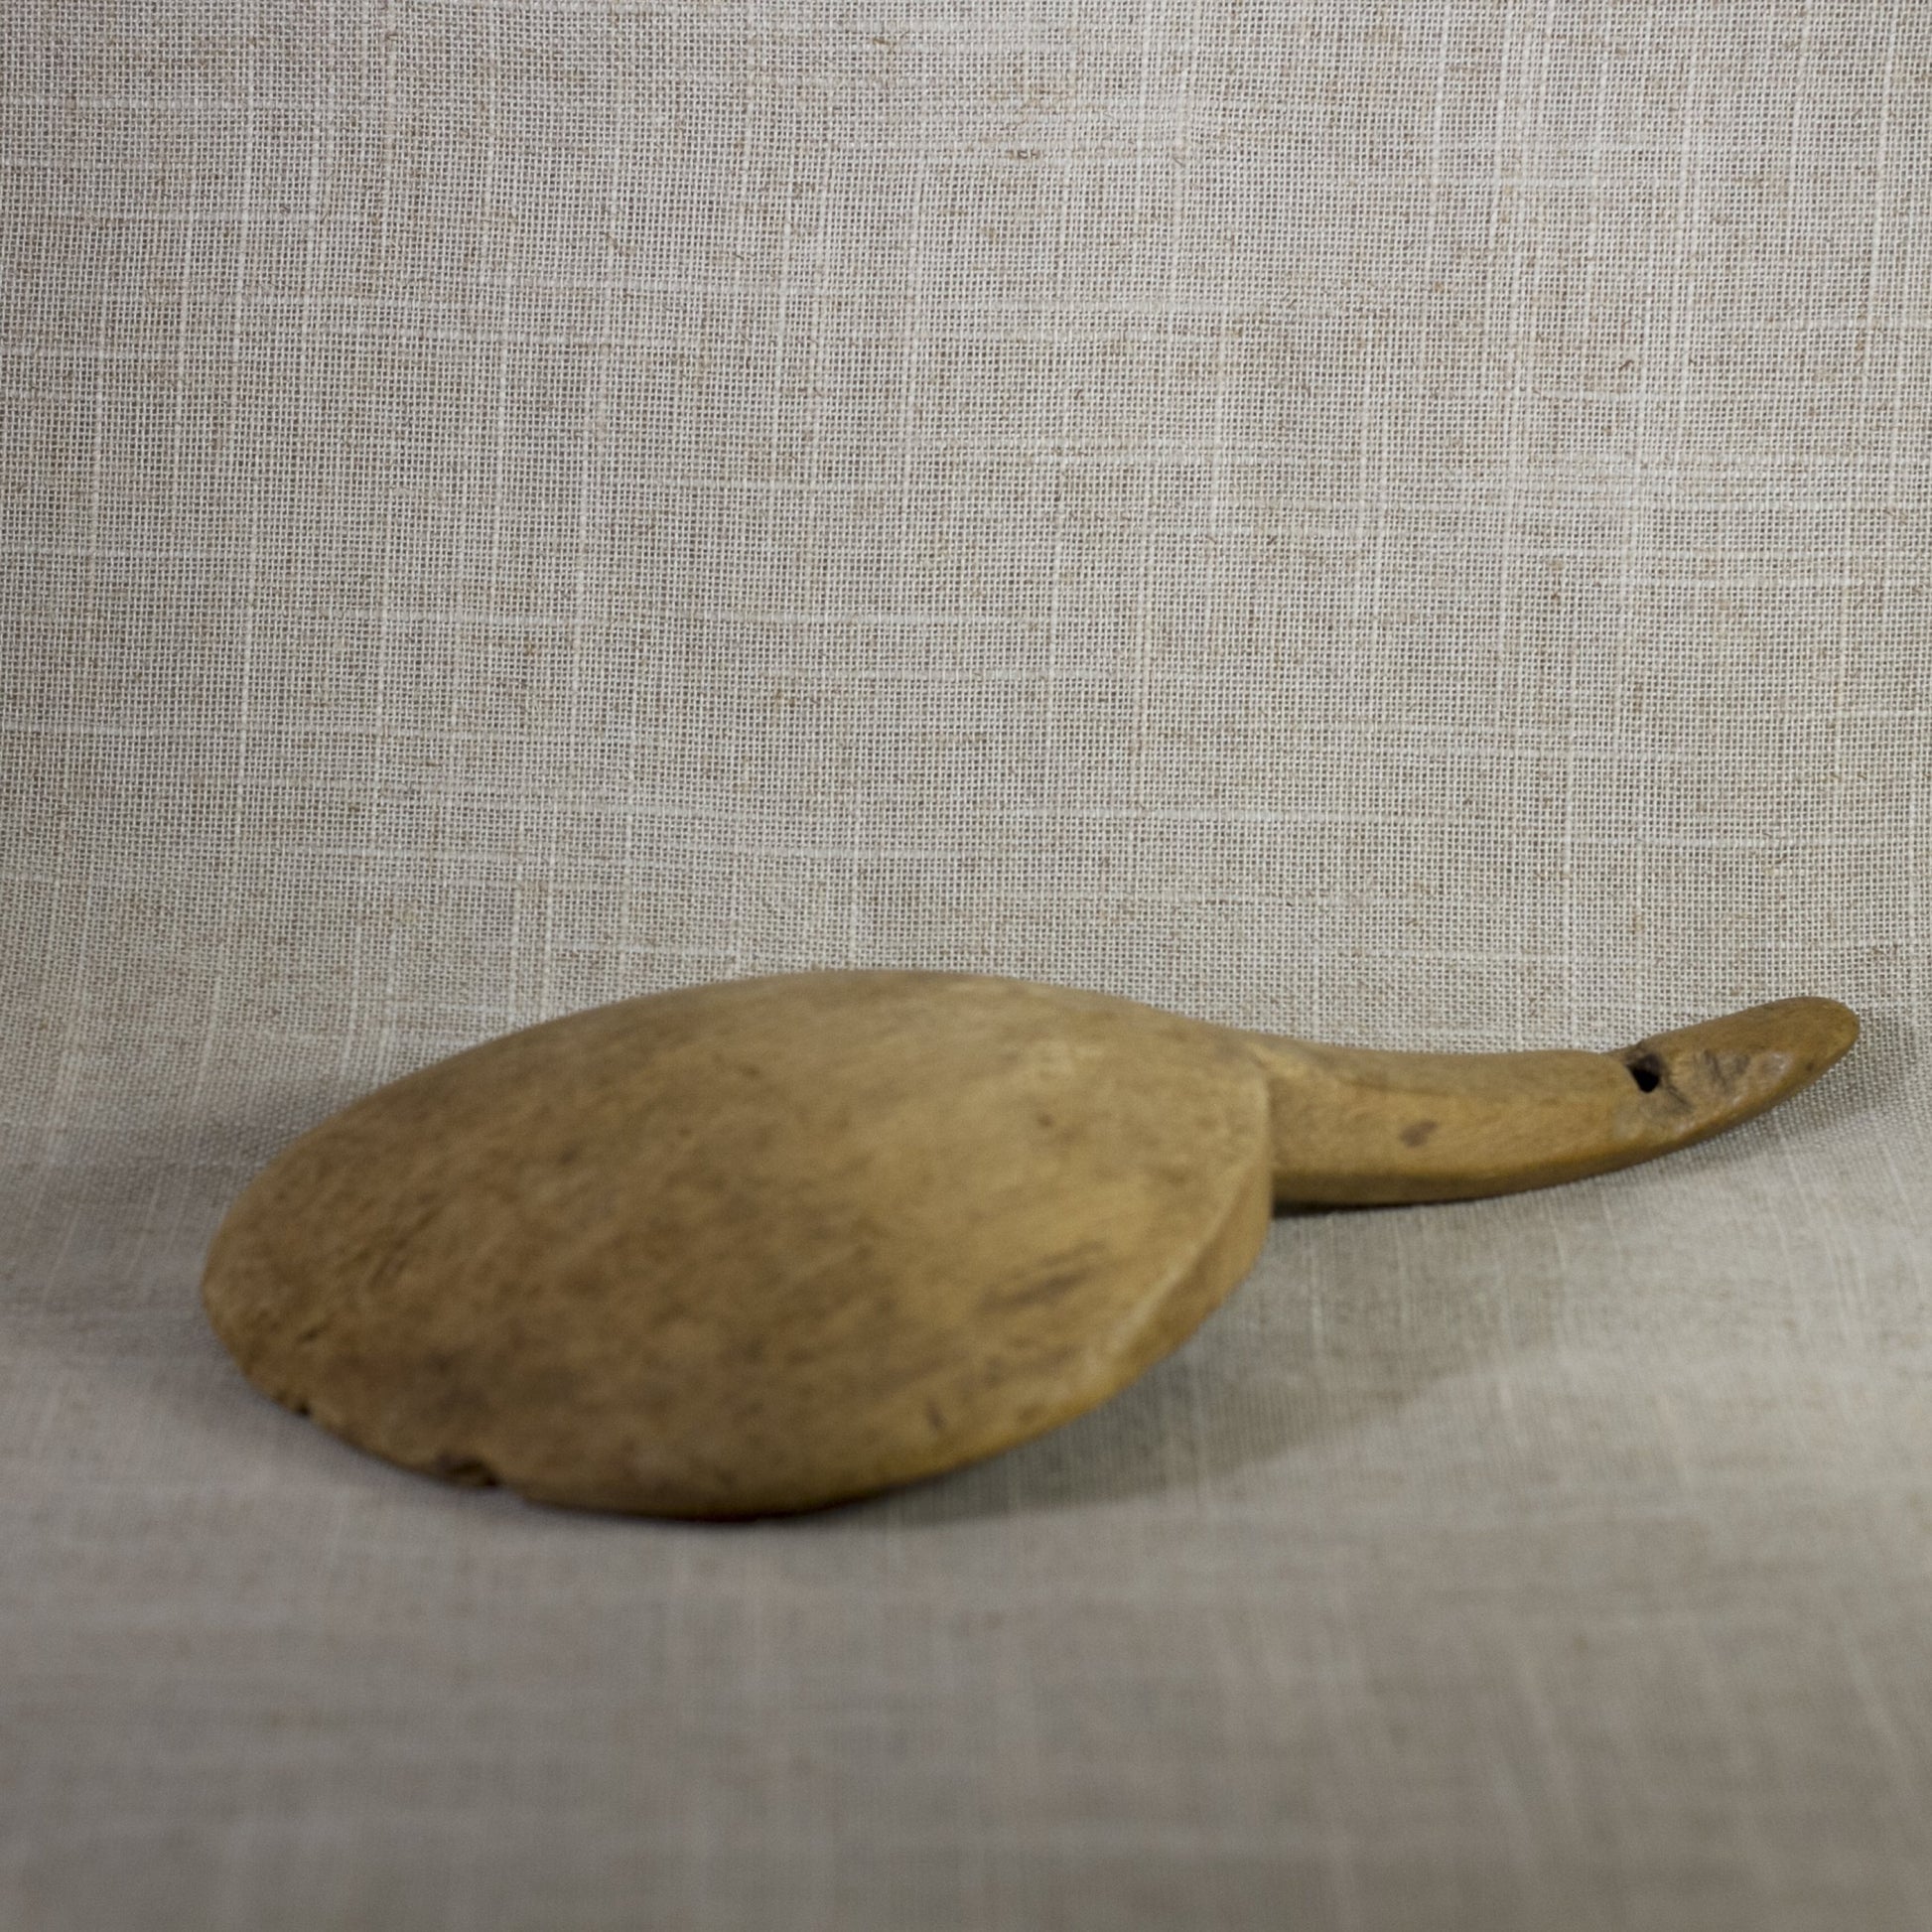 PRIMITIVE WOODEN BUTTER PADDLE Circa Late 19th Century